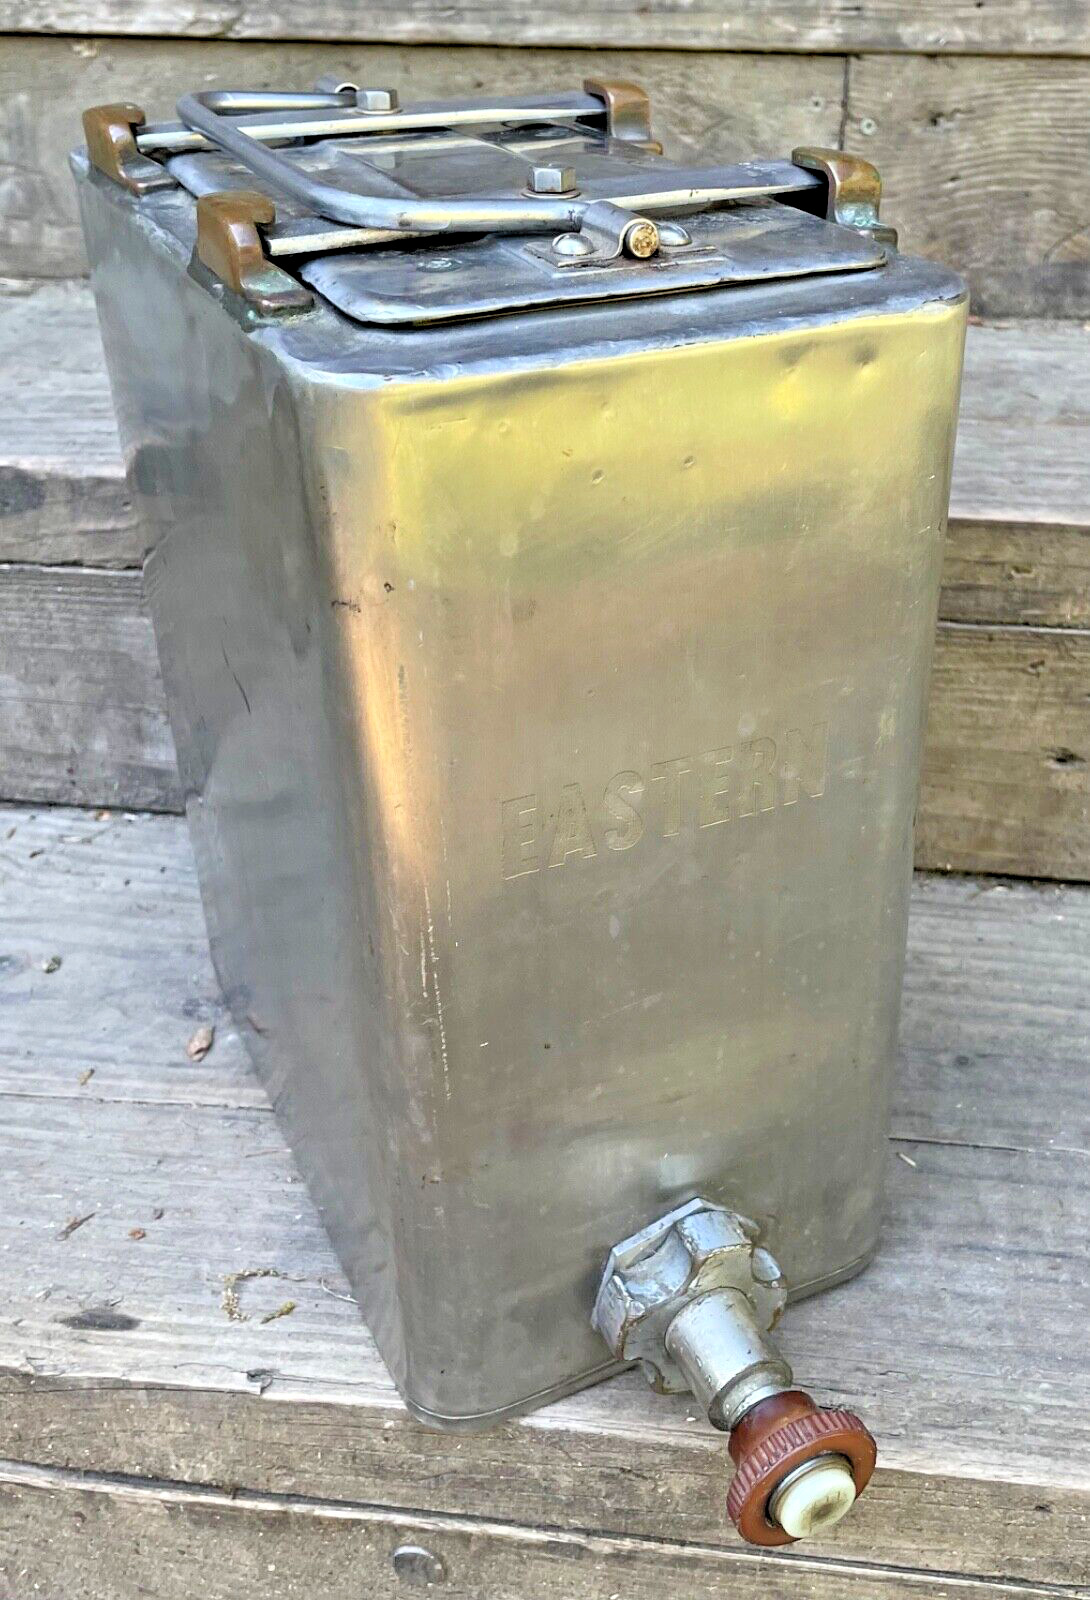 Vintage 1930s Eastern Airlines Galley Hot Water Coffee Beverage Dispenser Rare